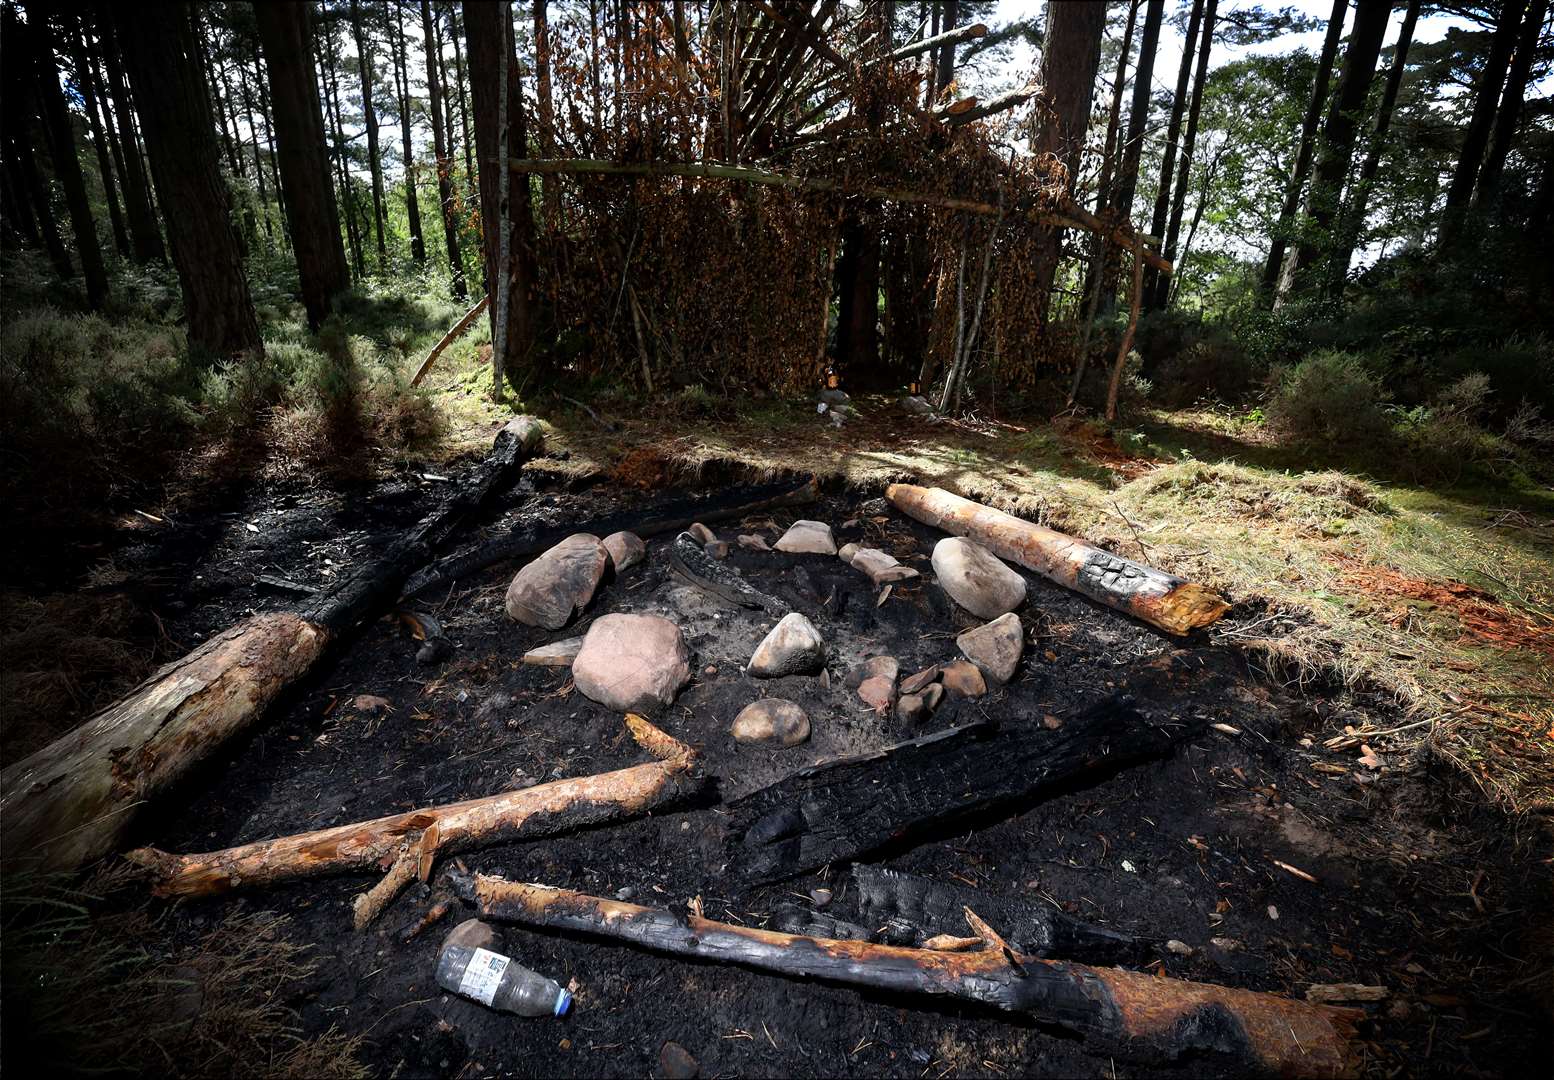 The fire spread and even burnt the logs that had been placed to be used as seating. Picture: James Mackenzie.